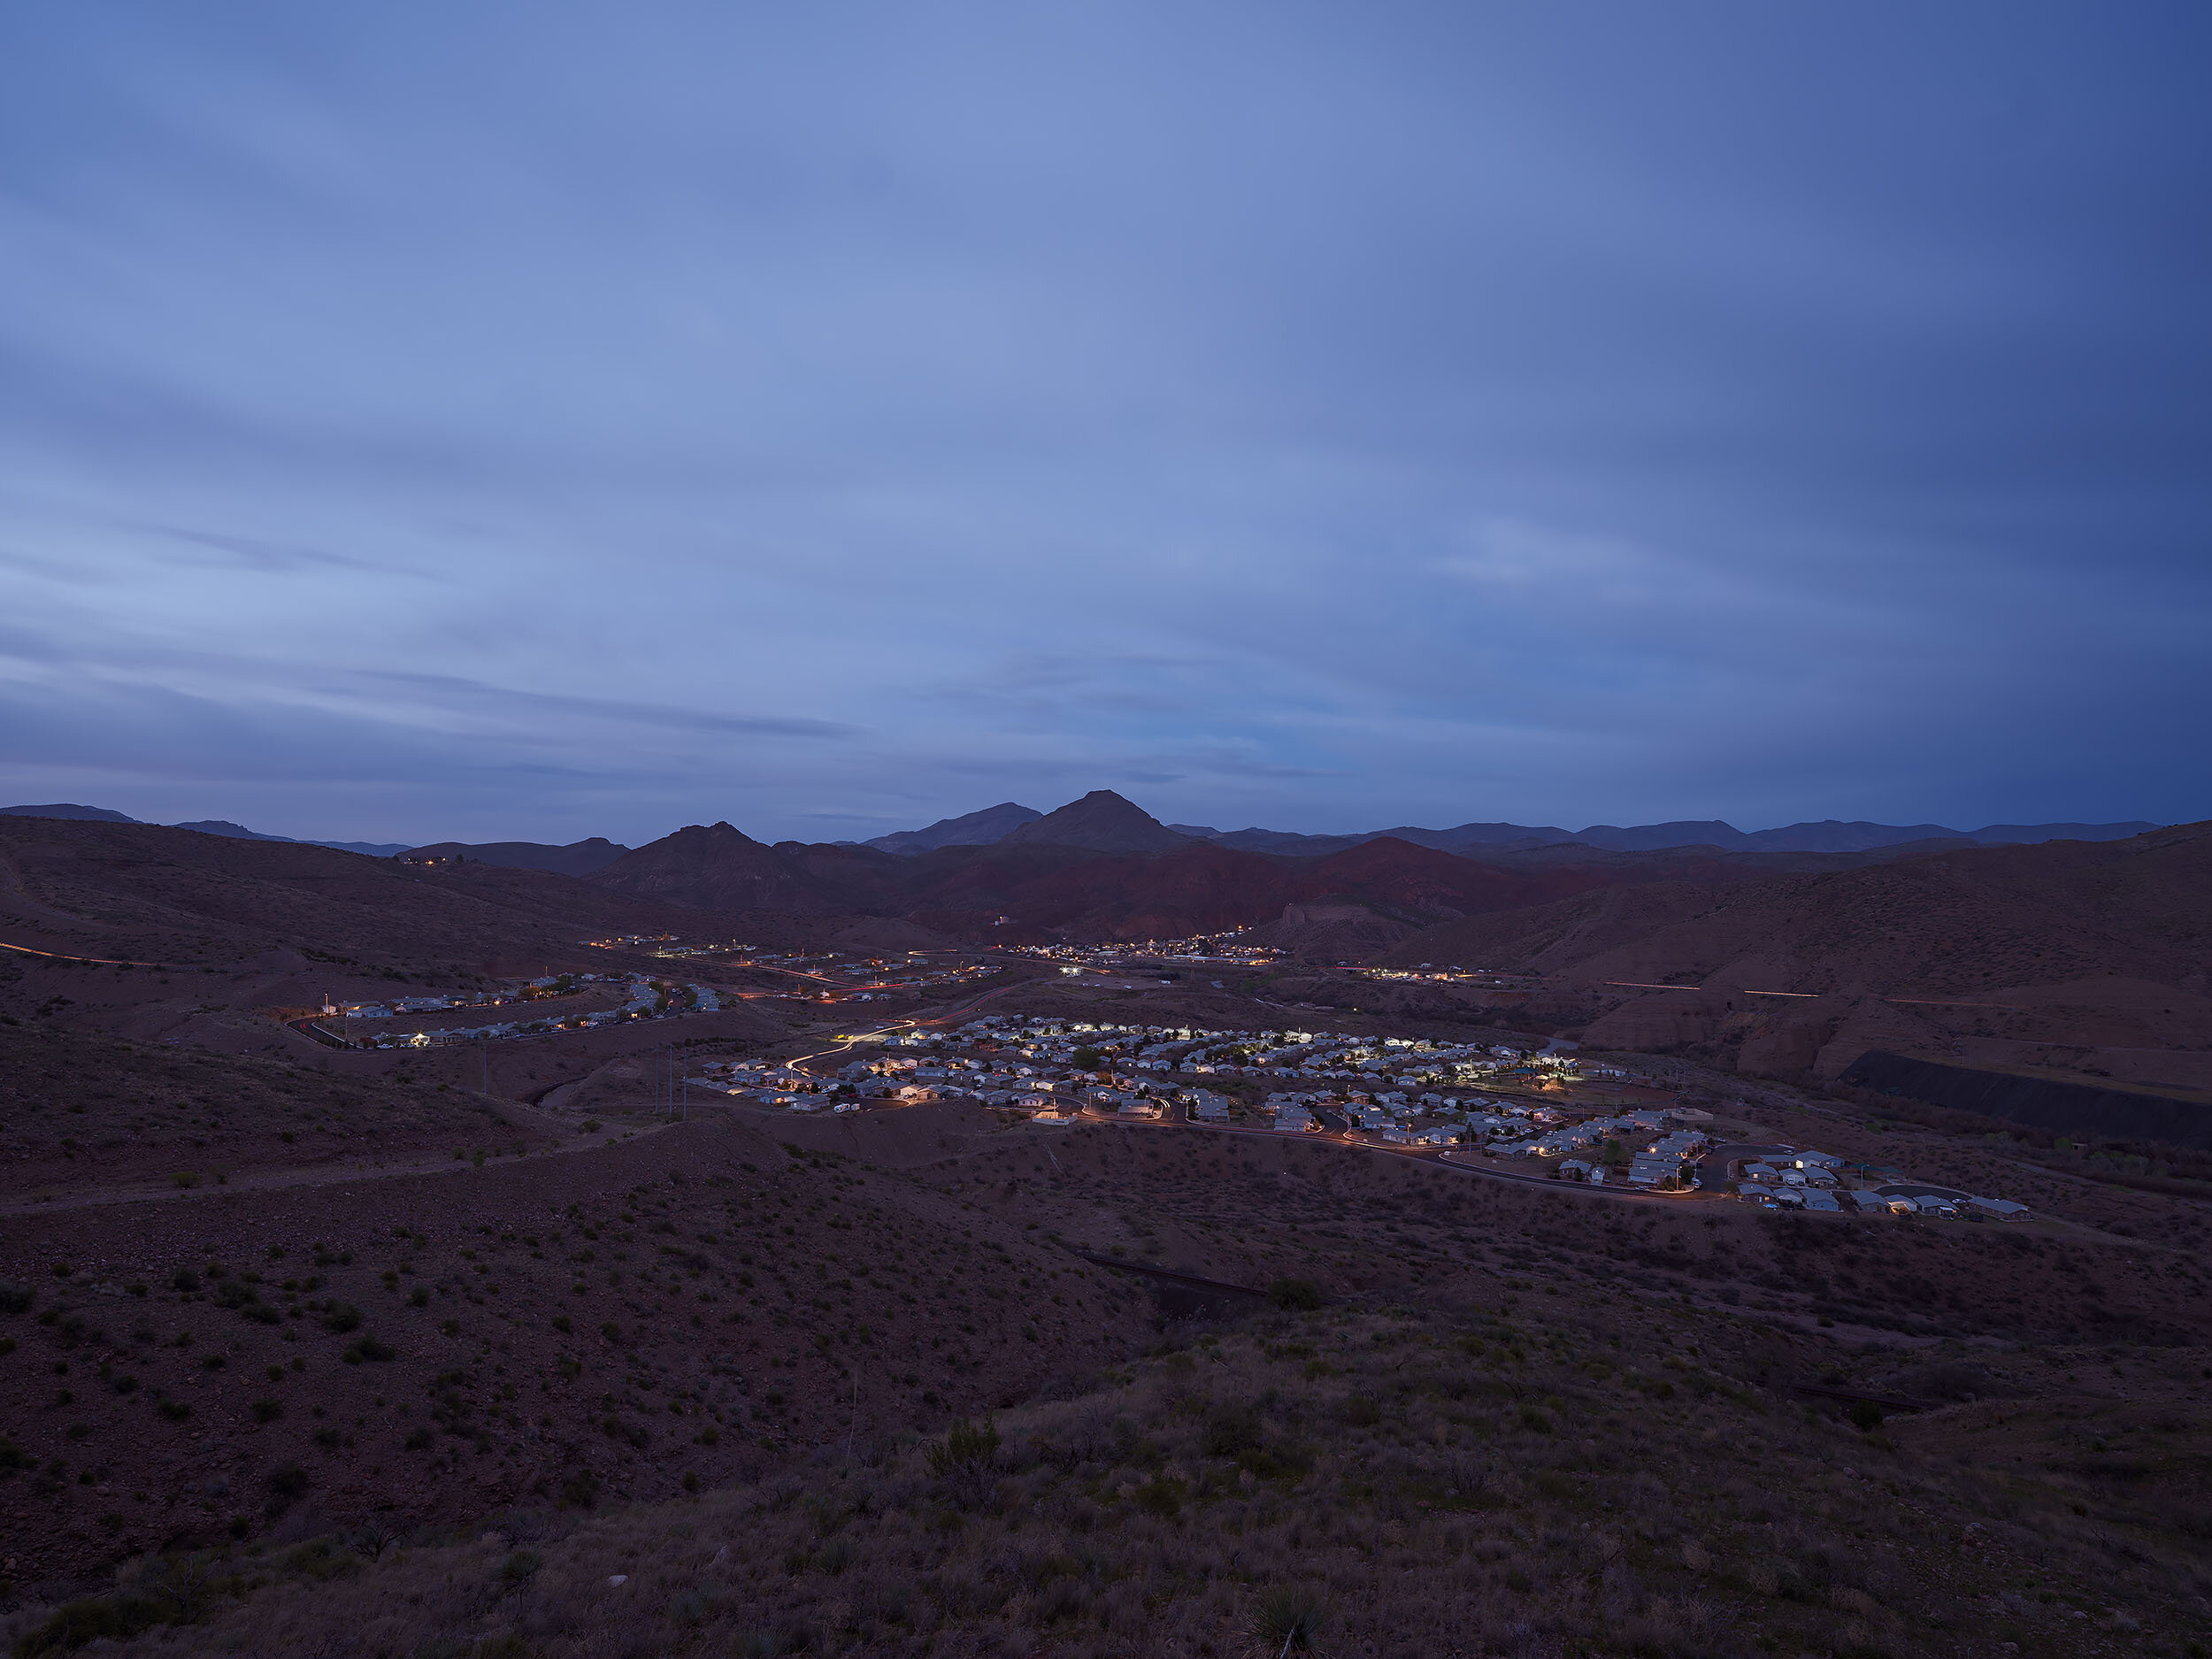 "Copper Verde" Freeport-McMoran Morenci housing with the town of Clifton and Mulligan Peak in the background